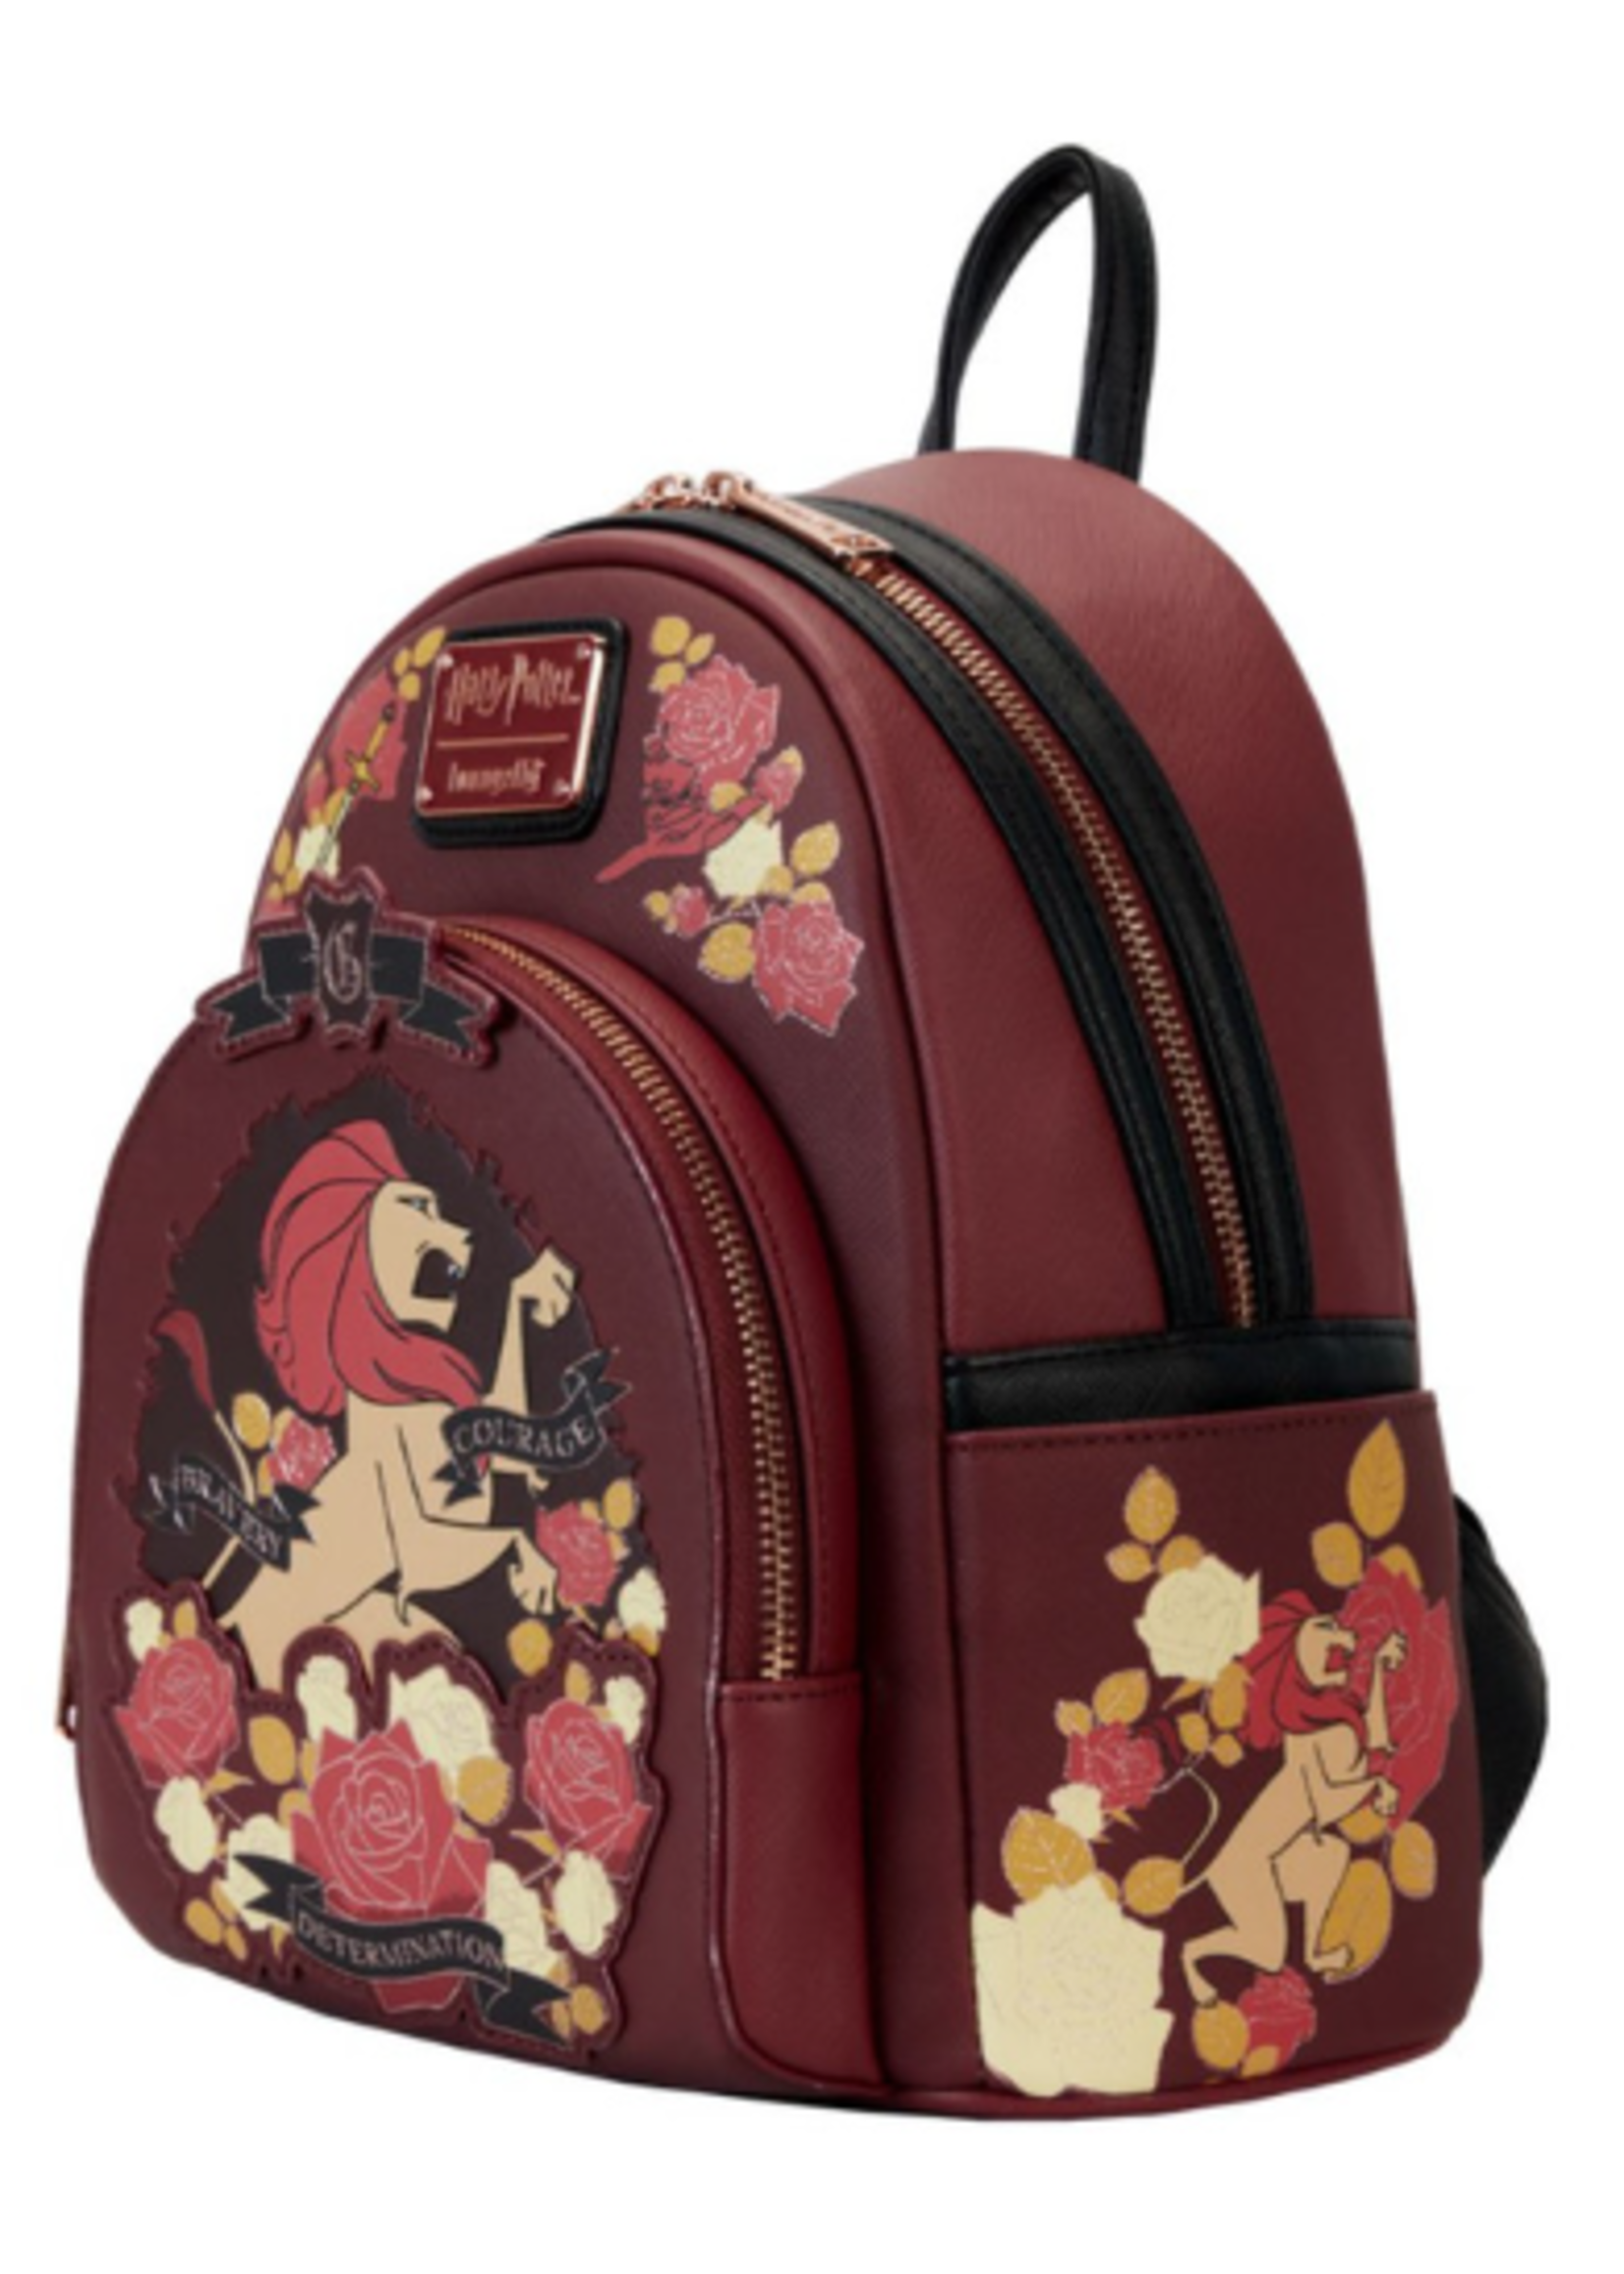 Loungefly LOUNGEFLY HARRY POTTER GRYFFINDOR TATTOO BACKPACK